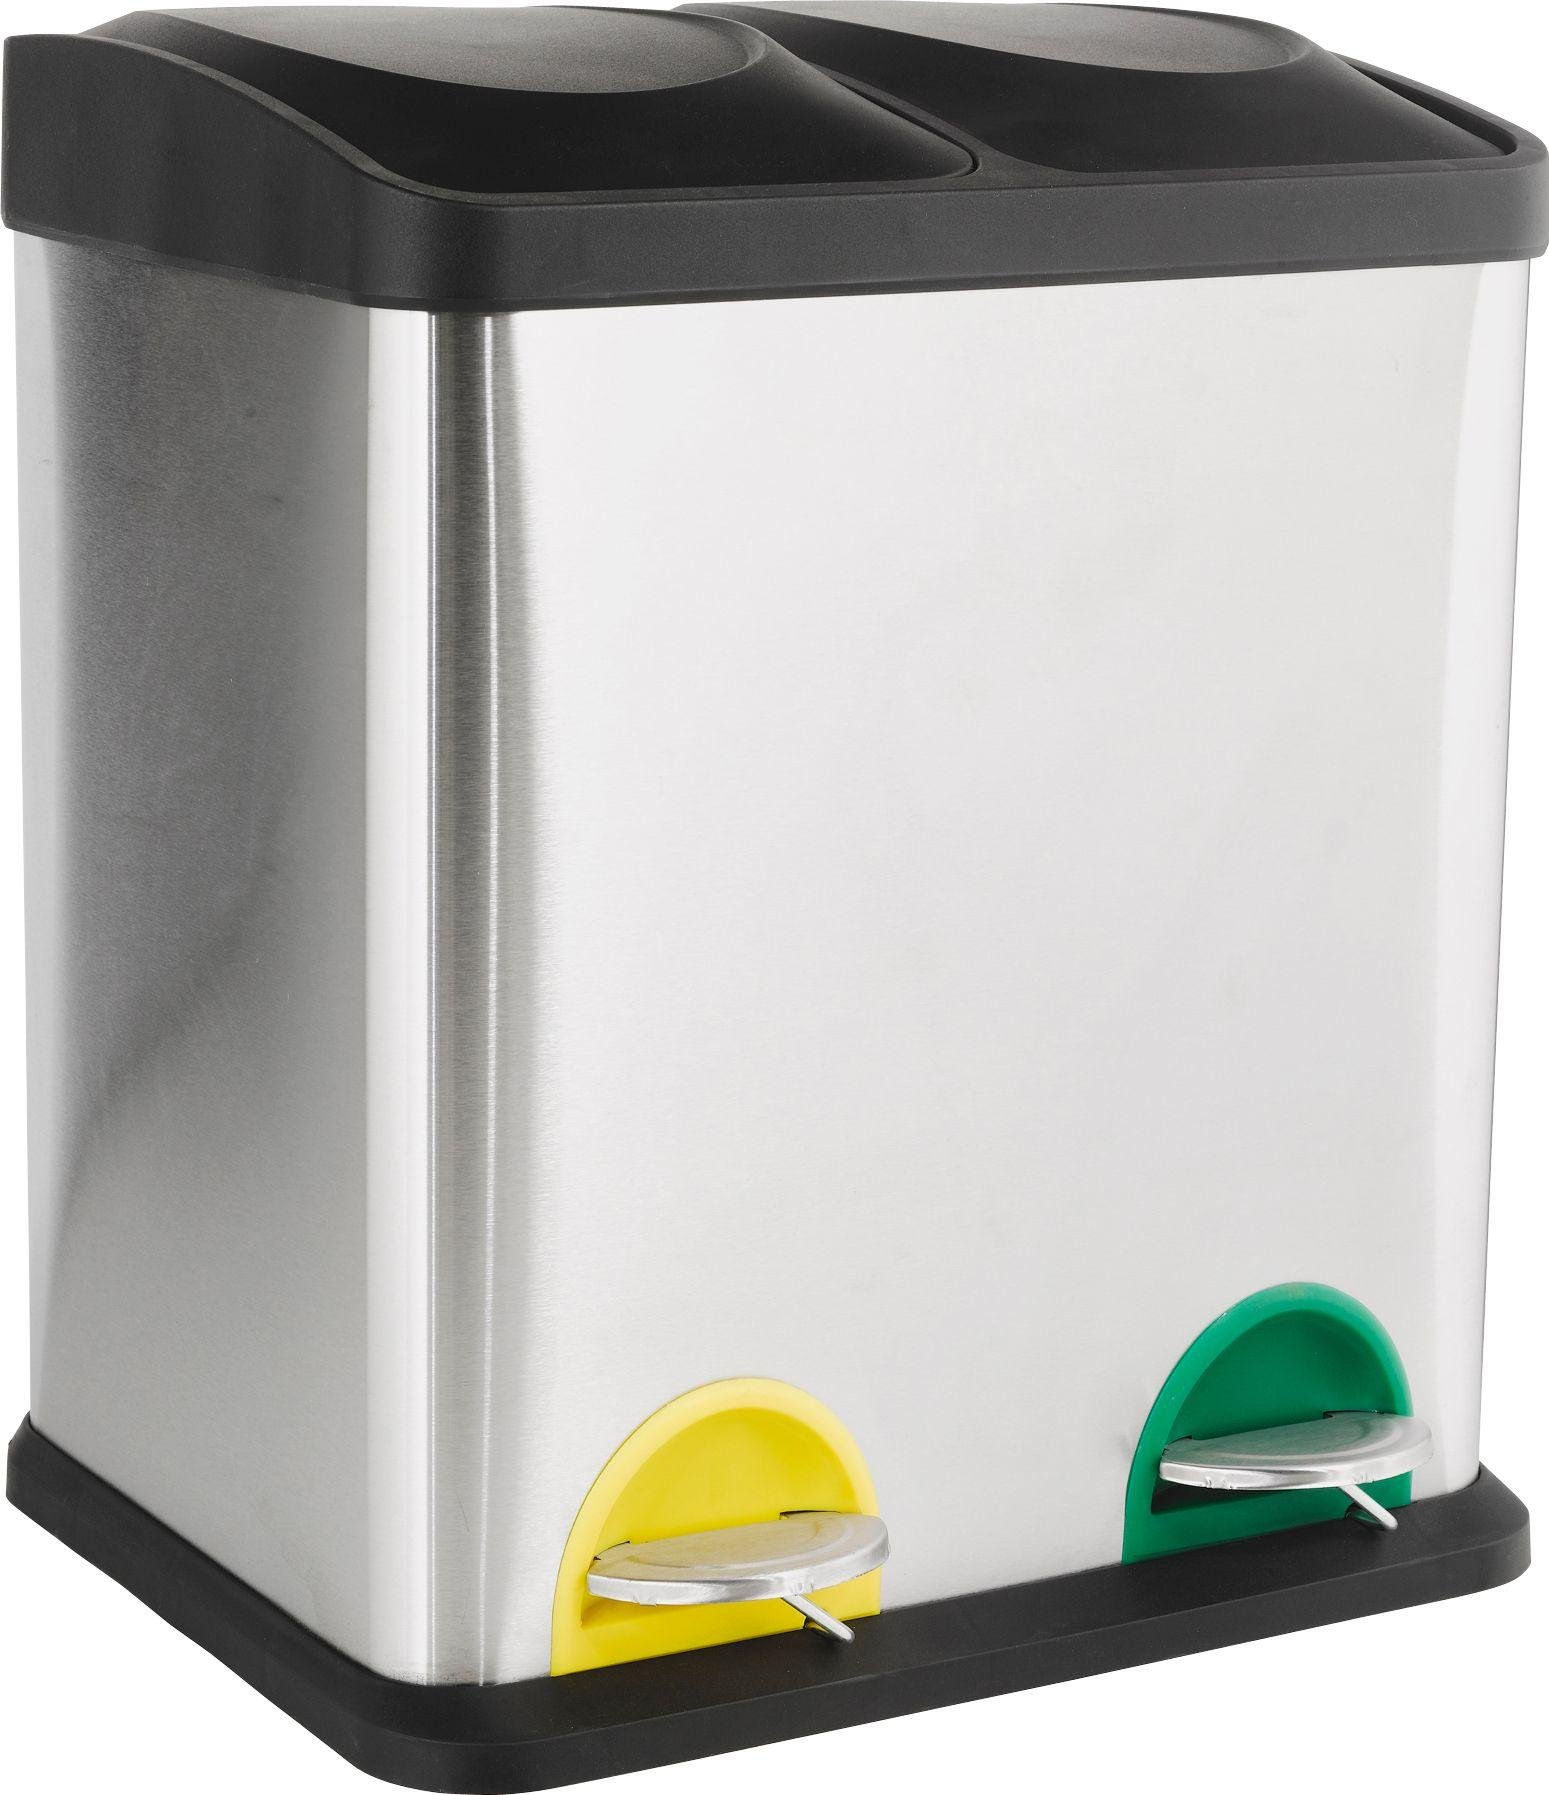 Argos Home 30 Litre Recycling Pedal Bin with 2 Compartments